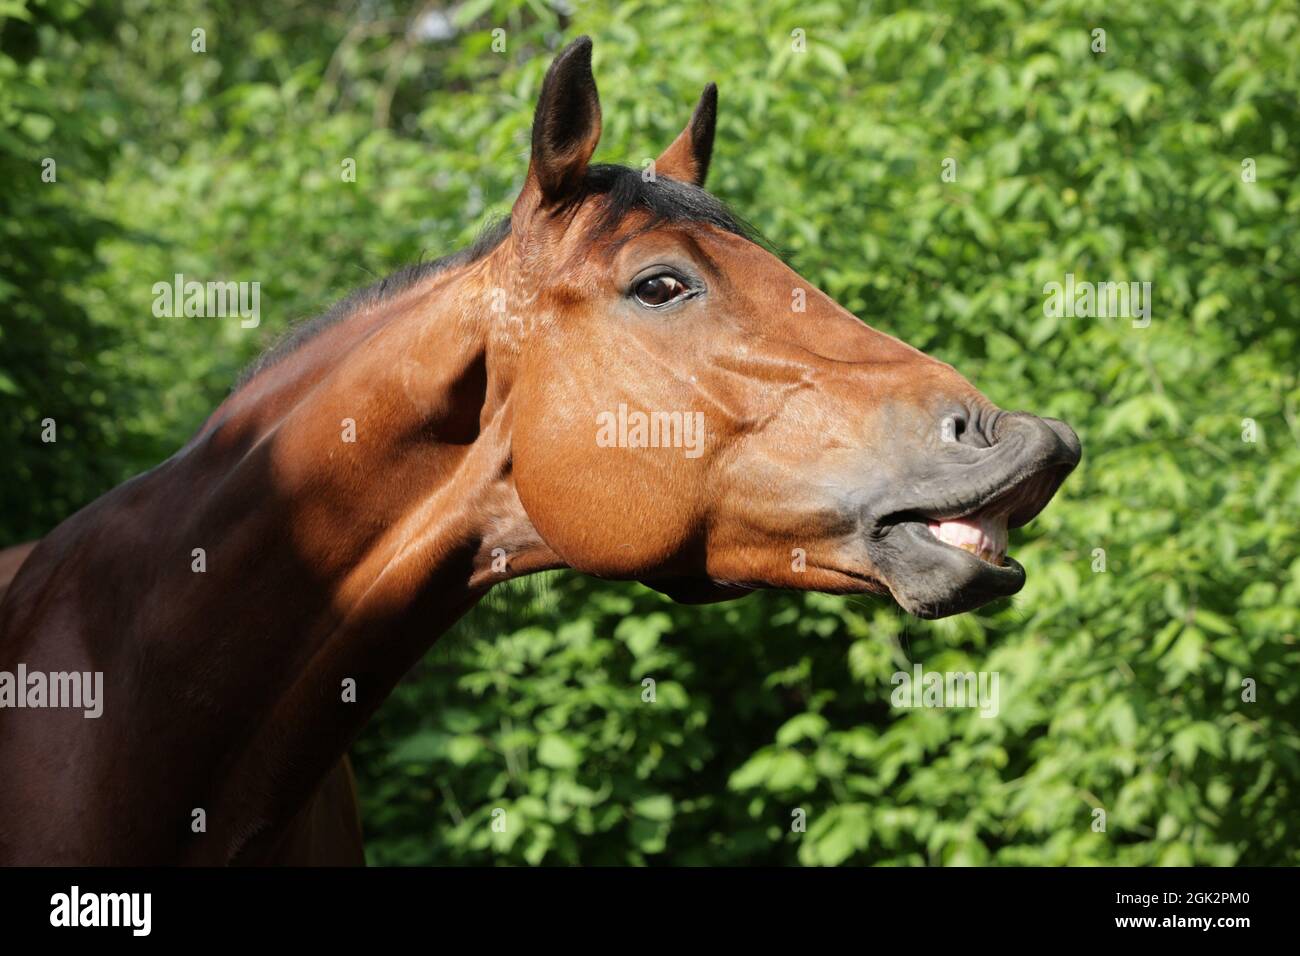 Beautiful horse head of smiling horse on green summer or grass Stock Photo